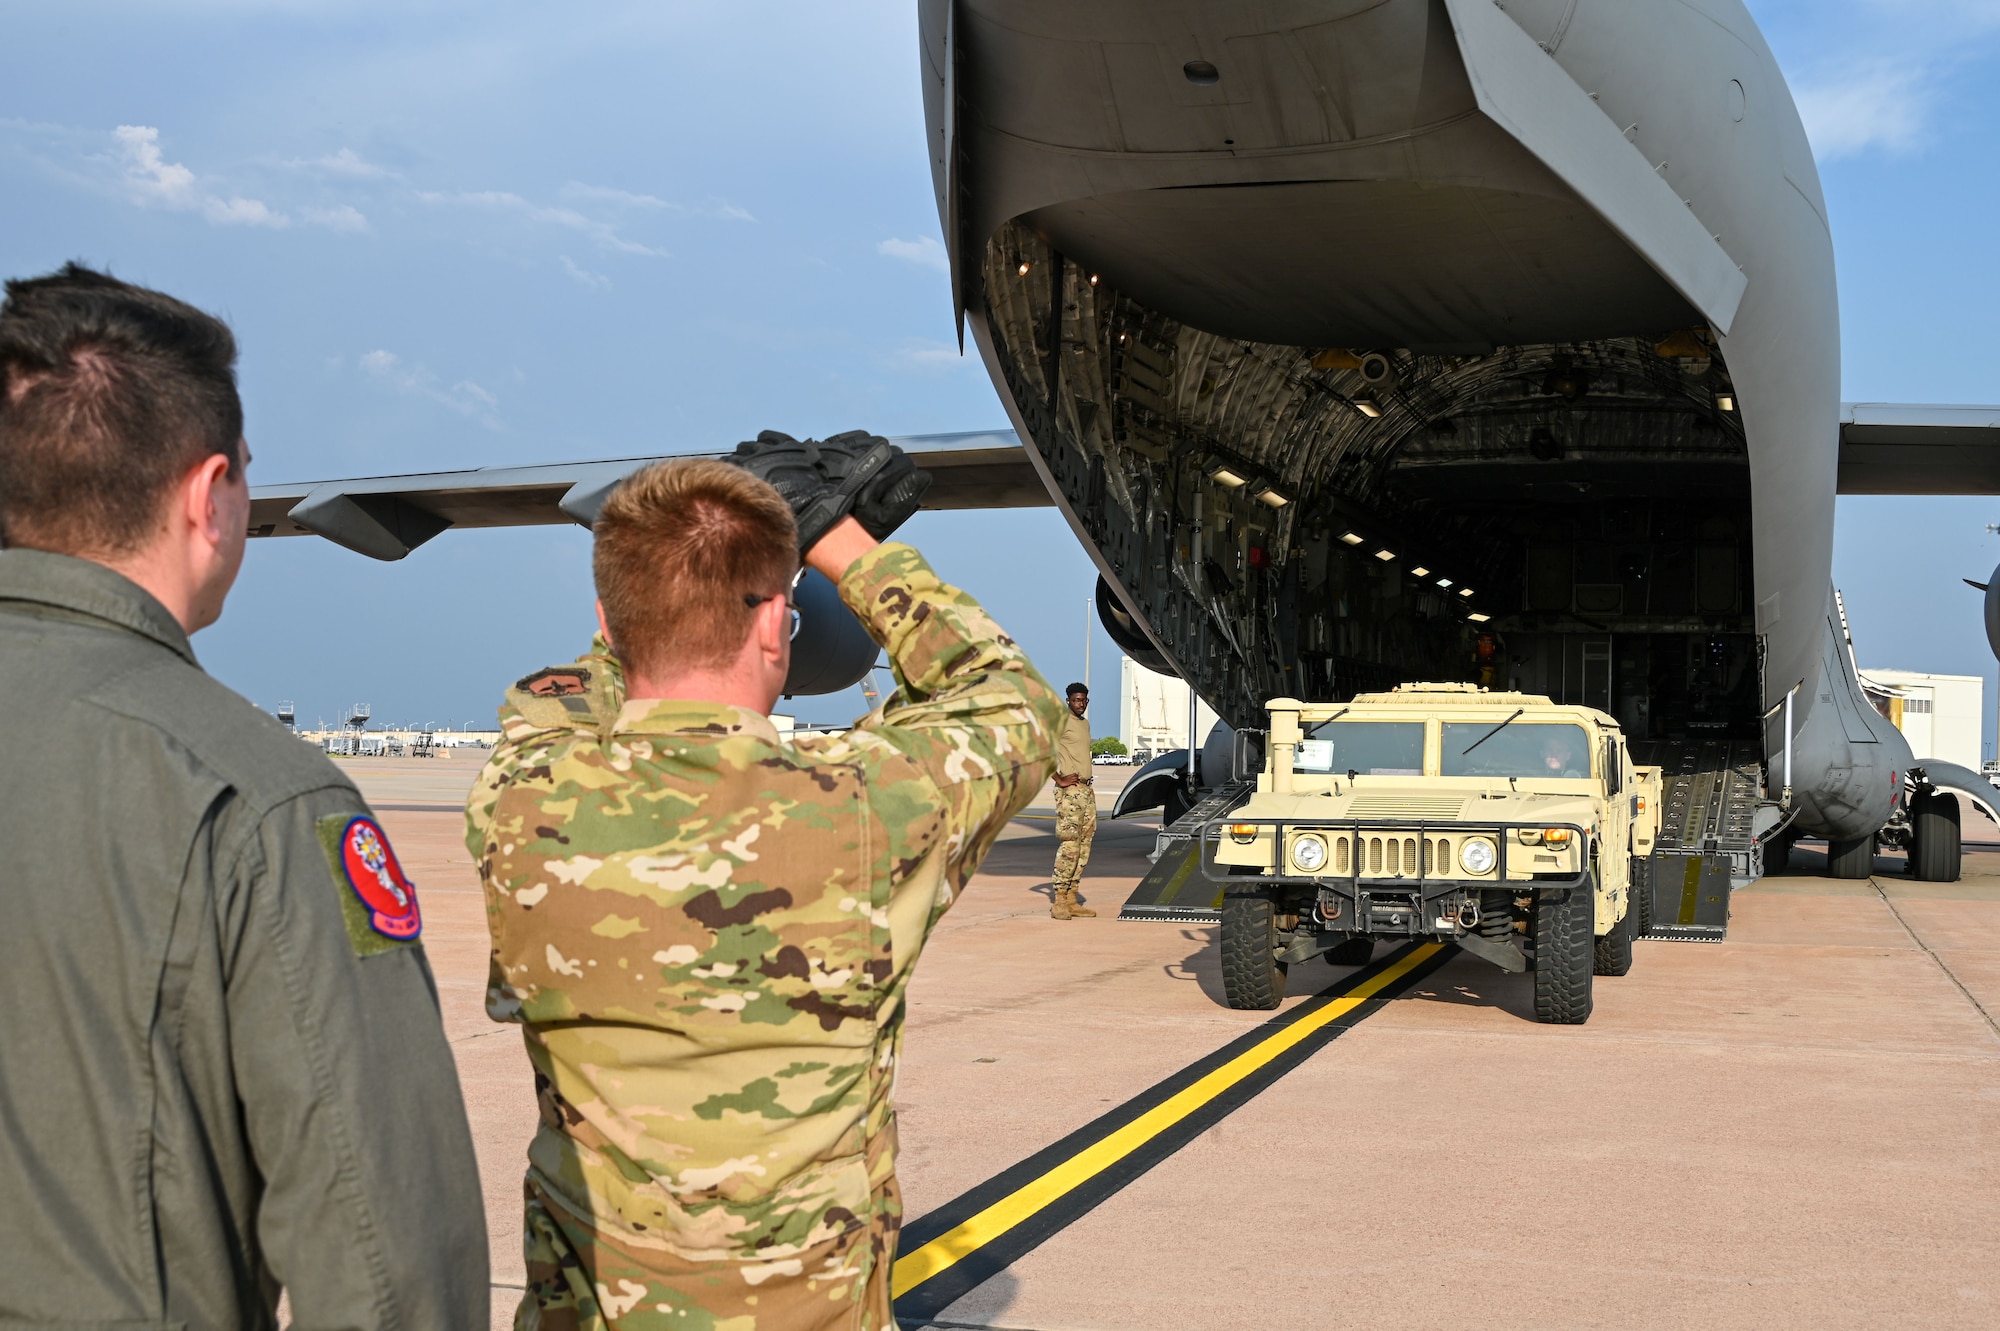 U.S. Air Force Staff Sgt. Douglas Gerrity (left), 58th Airlift Squadron loadmaster instructor, trains Airman 1st Class Donald Miller (right), 97th Training Squadron student, on how to properly load equipment onto a C-17 Globemaster III at Altus Air Force Base, Oklahoma, June 23, 2023. Gerrity has served for six years as a loadmaster and recently reenlisted for another four years. (U.S. Air Force photo by Senior Airman Kayla Christenson)